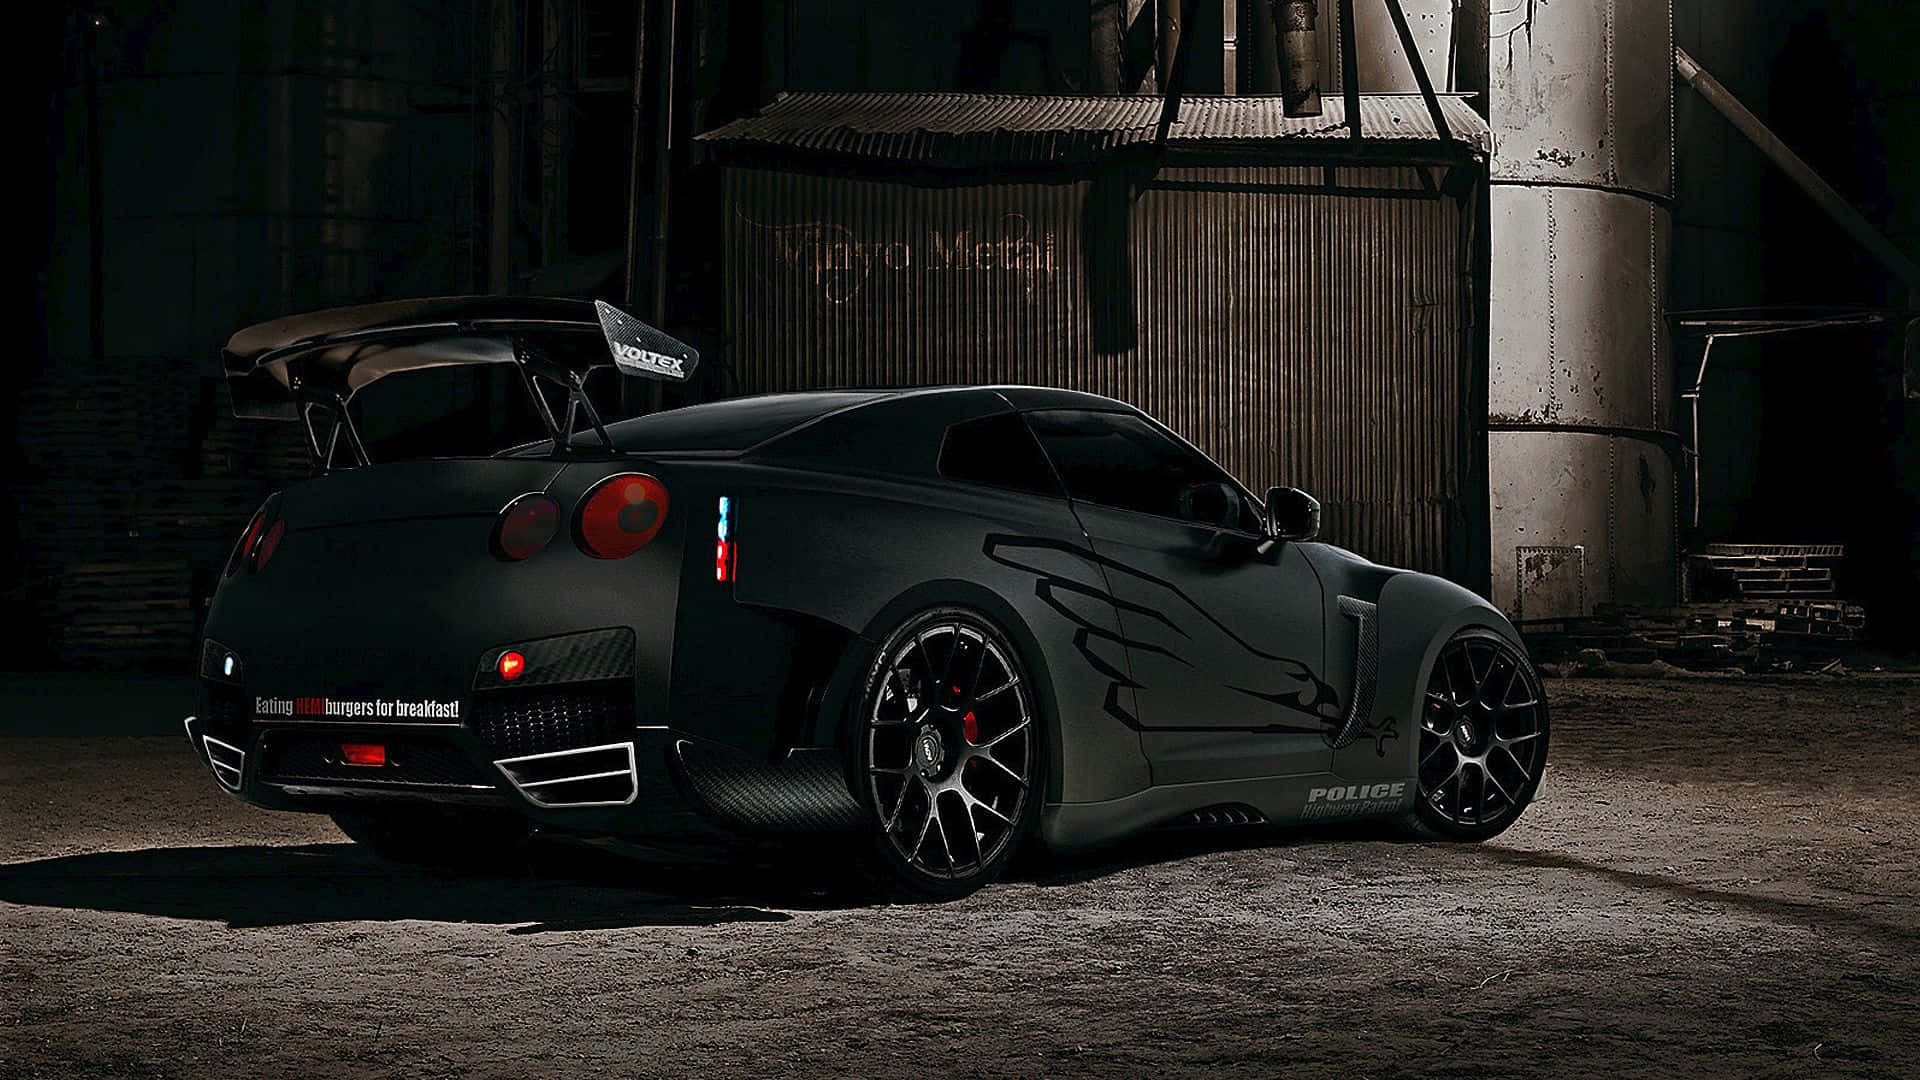 Cruise Down The Highway In Style With This Cool Gtr Background